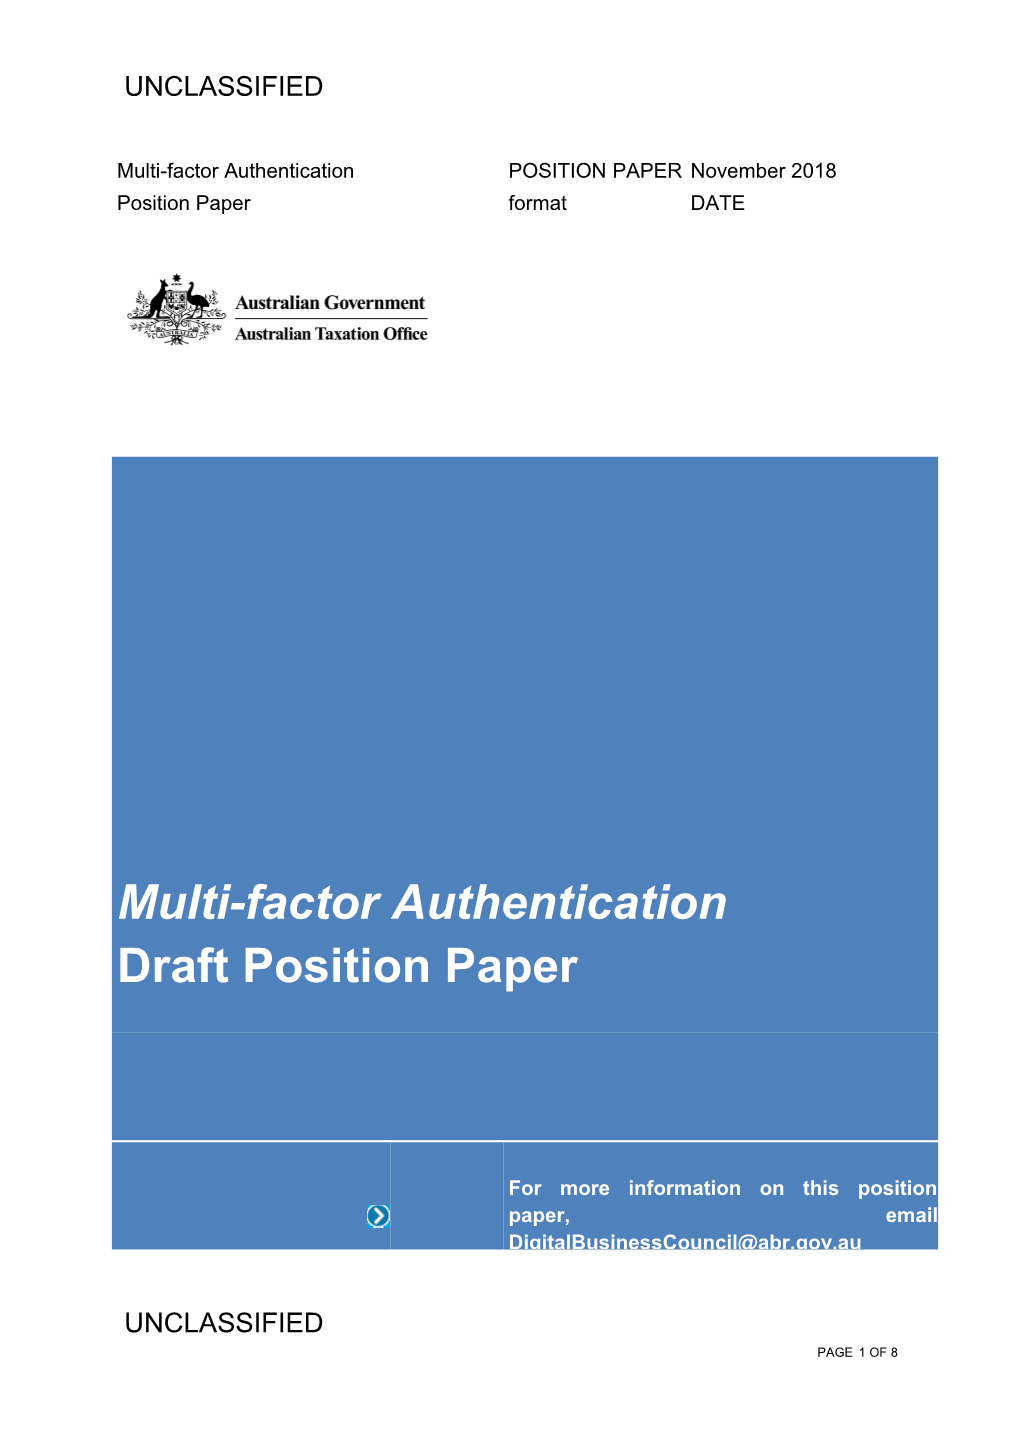 This Paper Provides Key Factors on the Approach for Implementing Multi-Factor Authentication